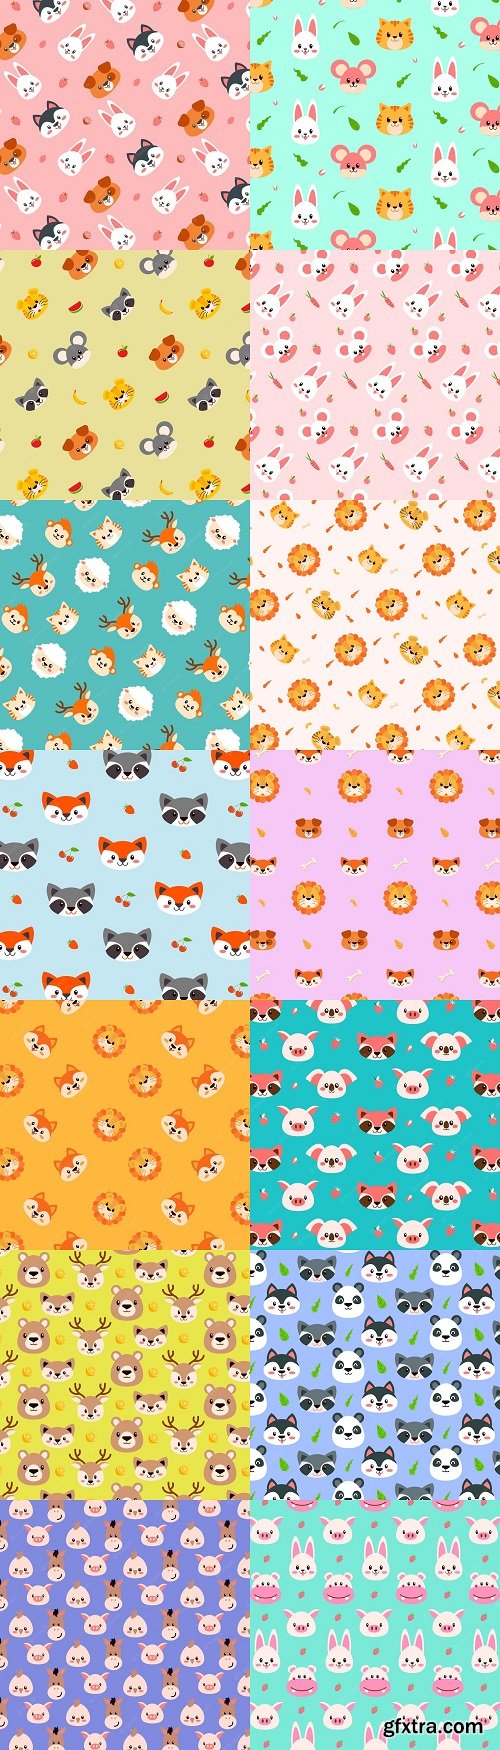 Colorful cute animals doodle seamless pattern